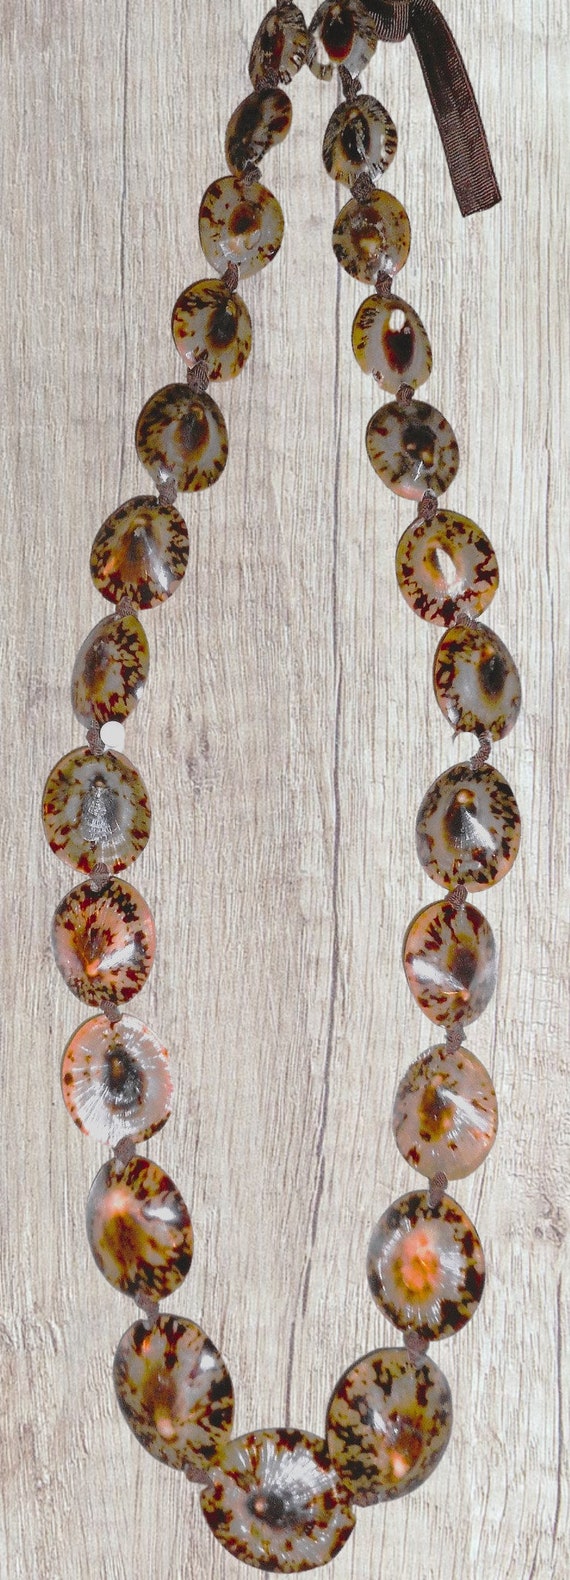 Hawaiian Tiger Cowrie Shell Necklace